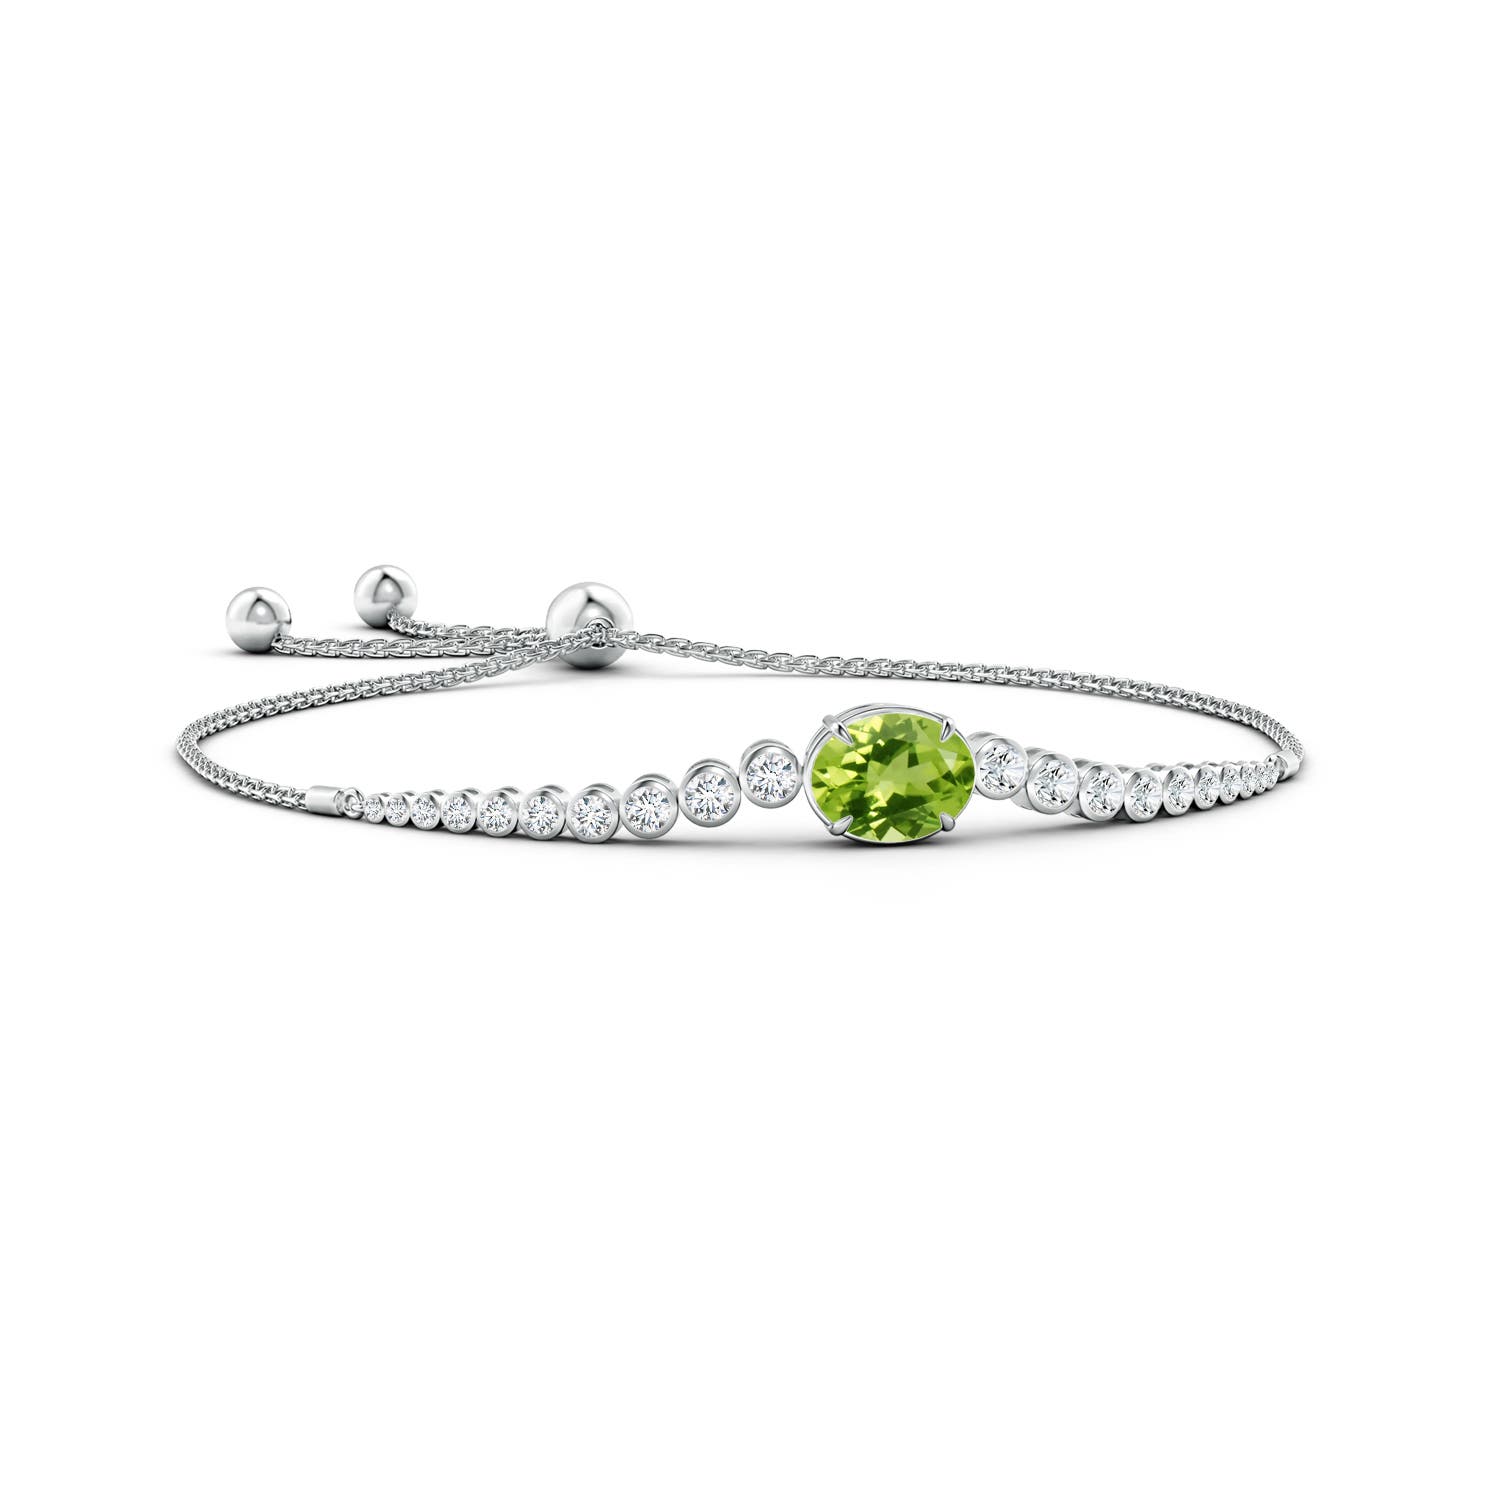 Buy Sunstone and Peridot Bracelet With Gold Filled Accetnt Online in India  - Etsy